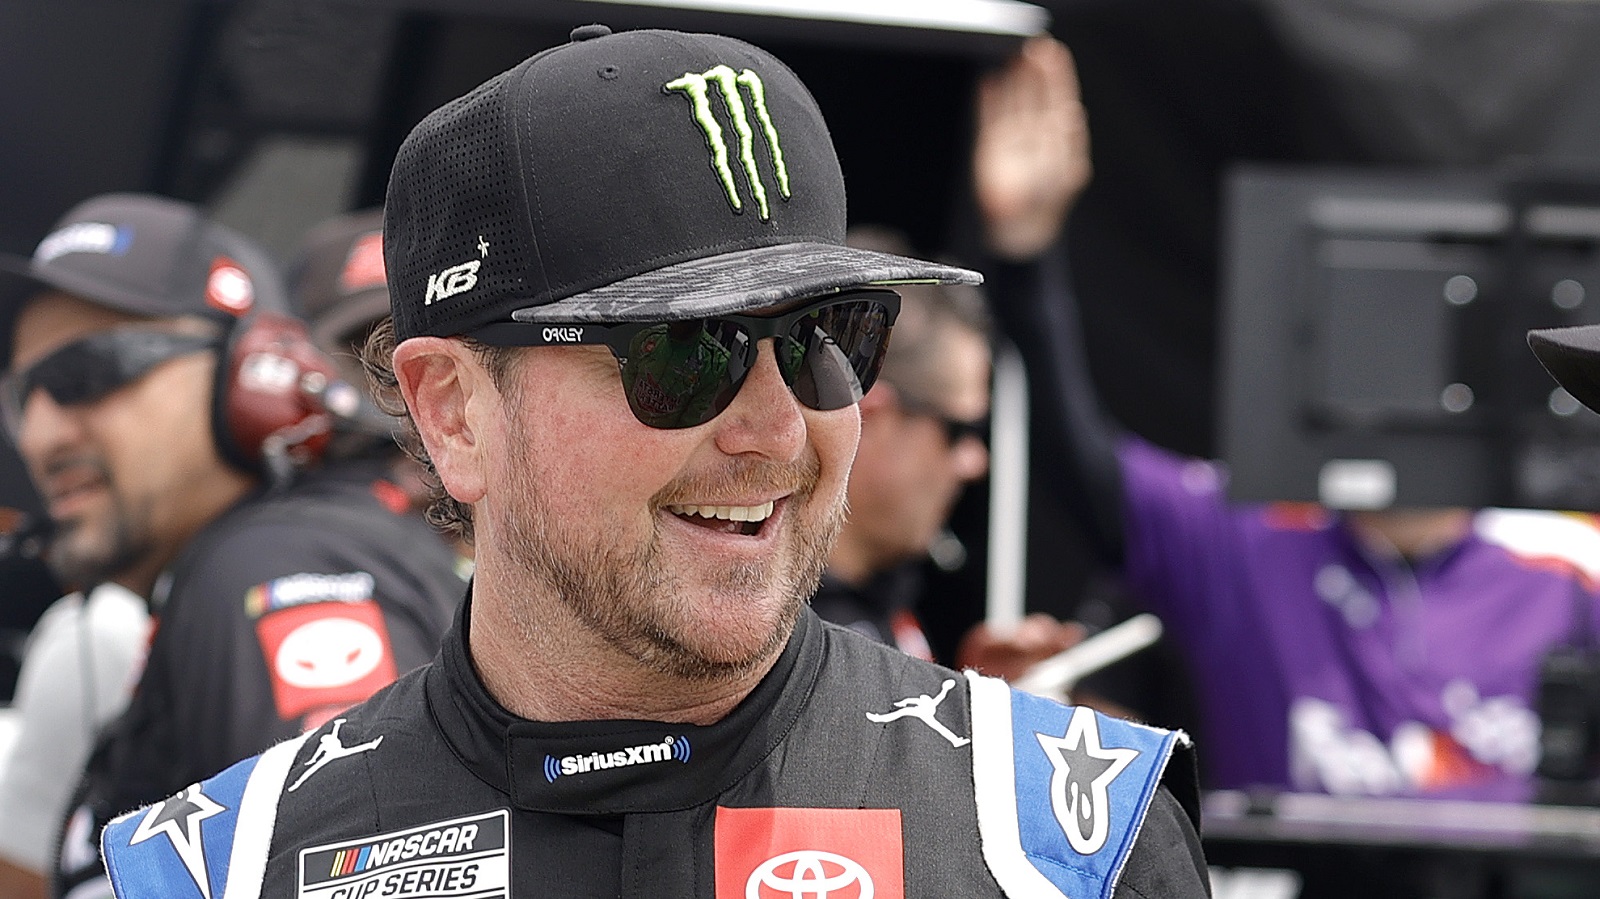 Kurt Busch on the grid during qualifying for the NASCAR Cup Series Ambetter 301 at New Hampshire Motor Speedway on July 16, 2022. | Tim Nwachukwu/Getty Images